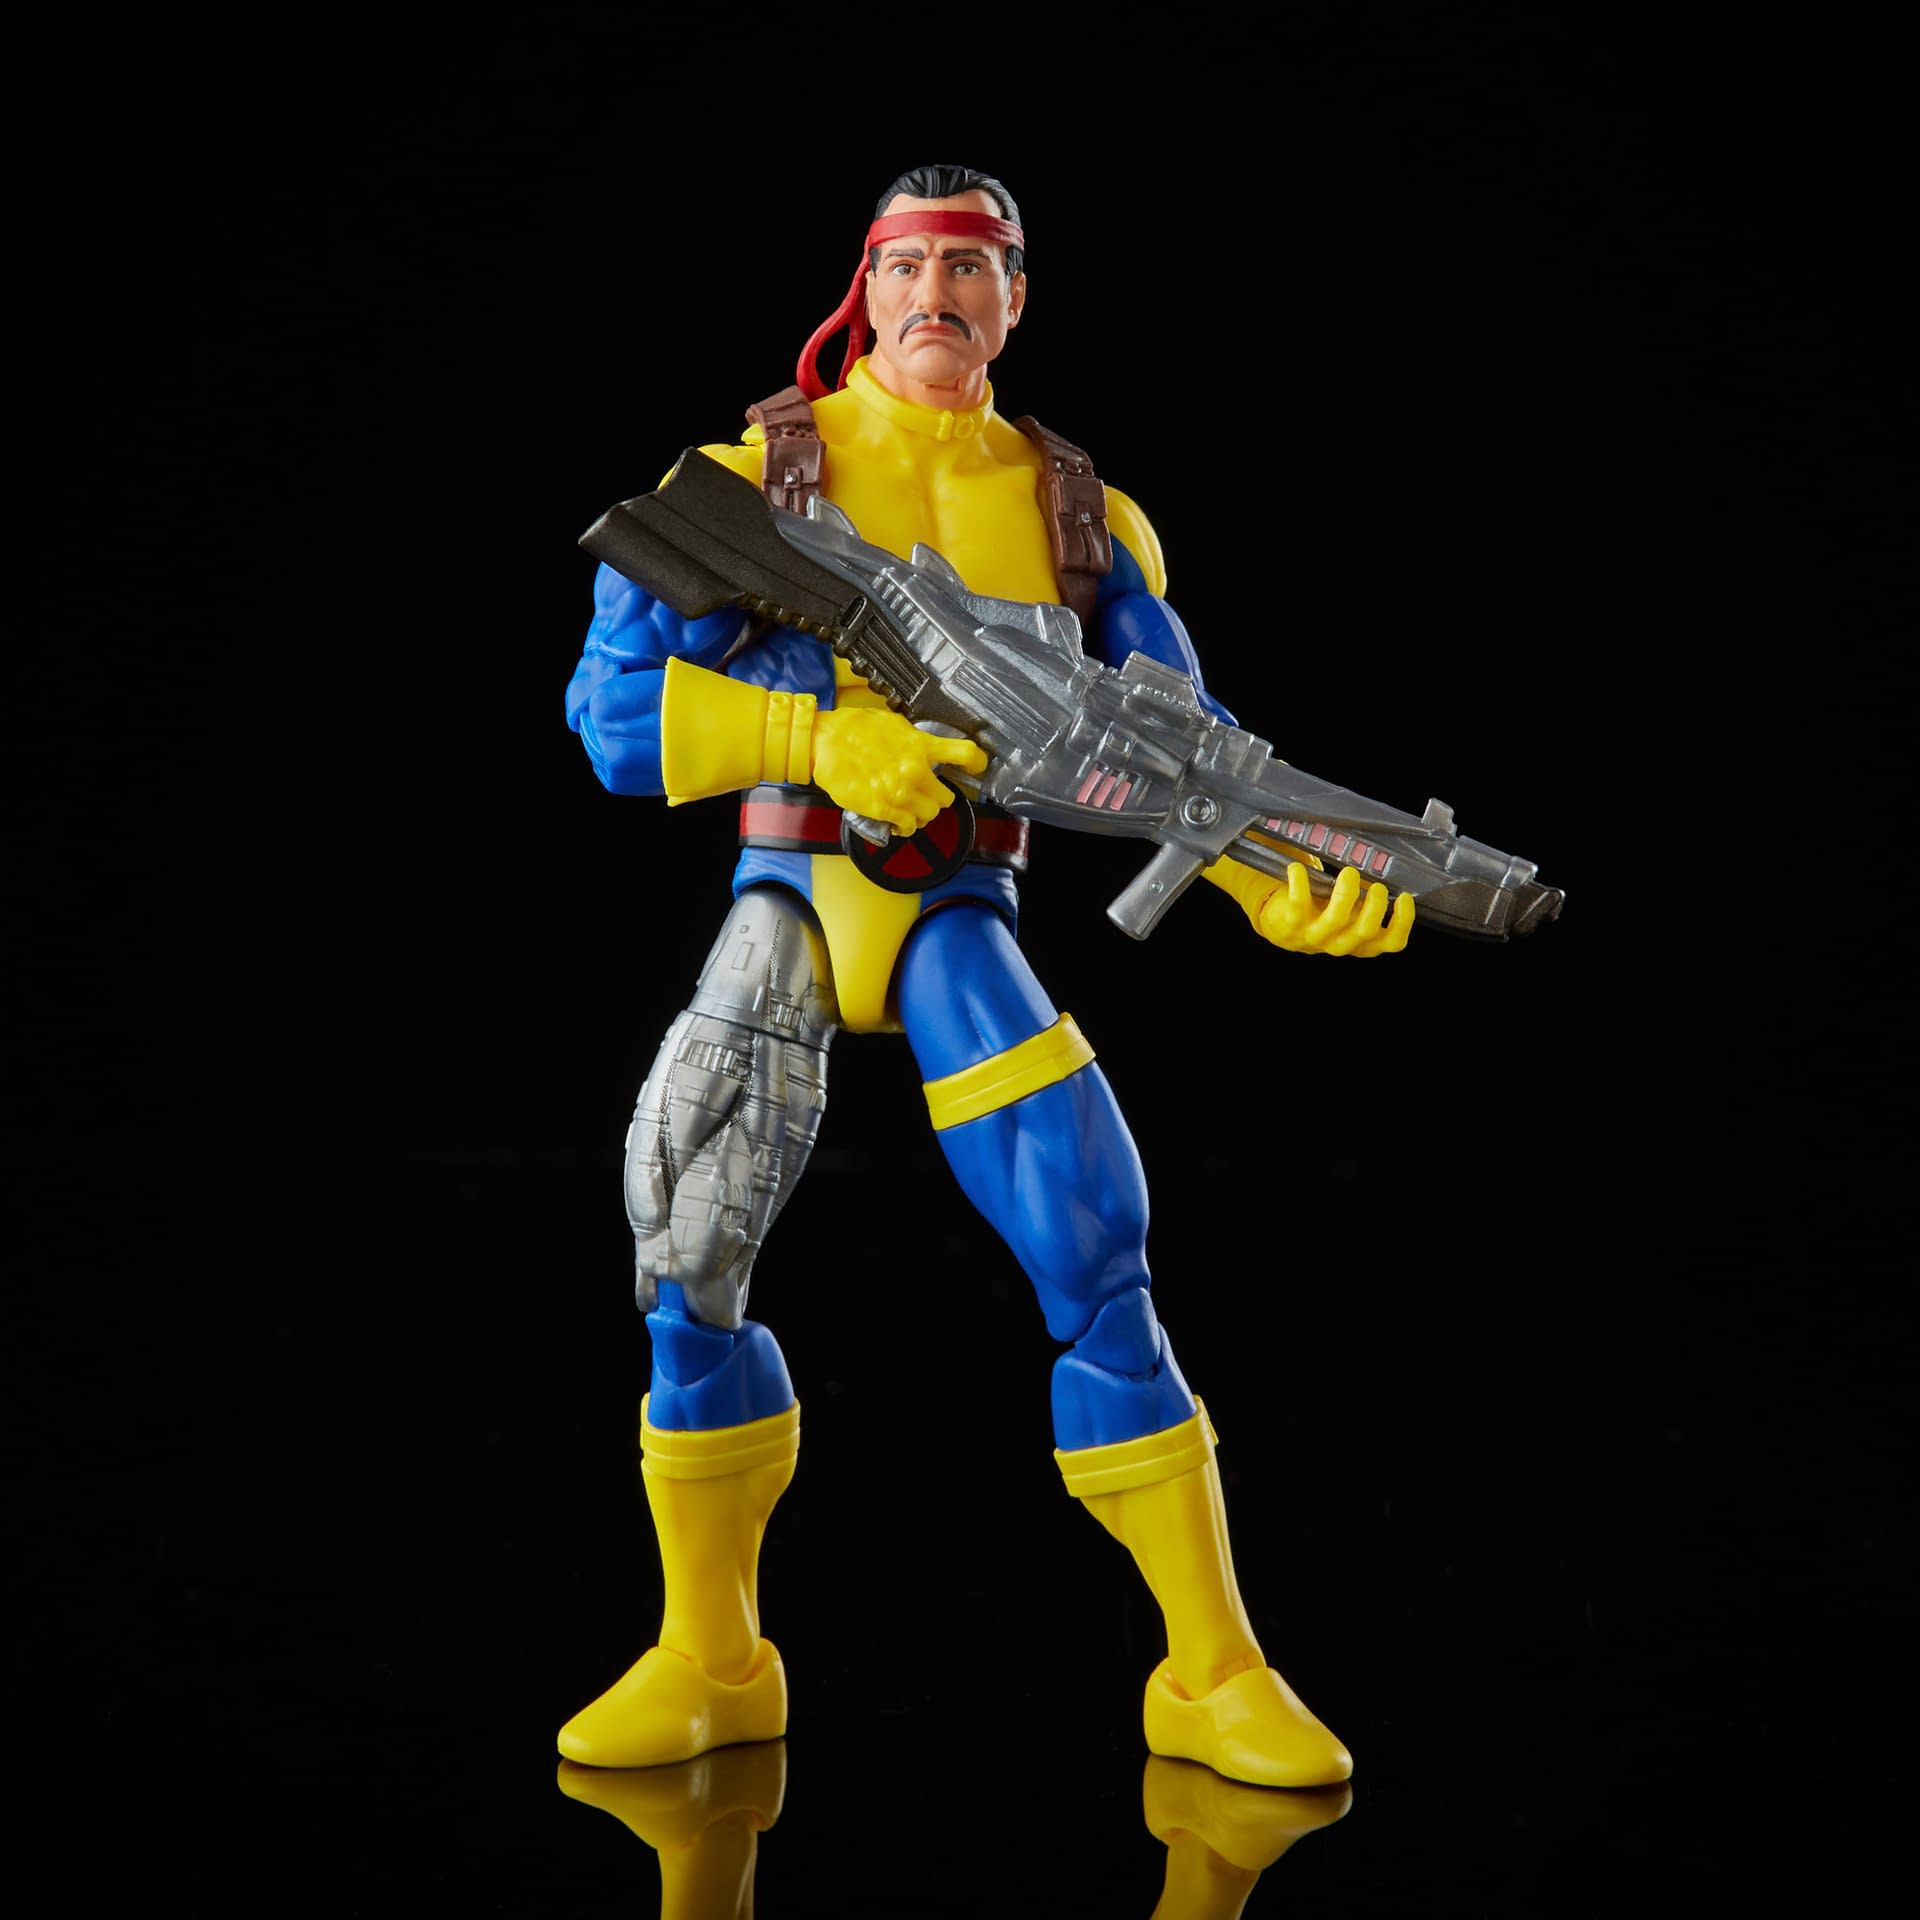 The Uncanny X-Men Are Here to Help with New Marvel Legends 3-Pack